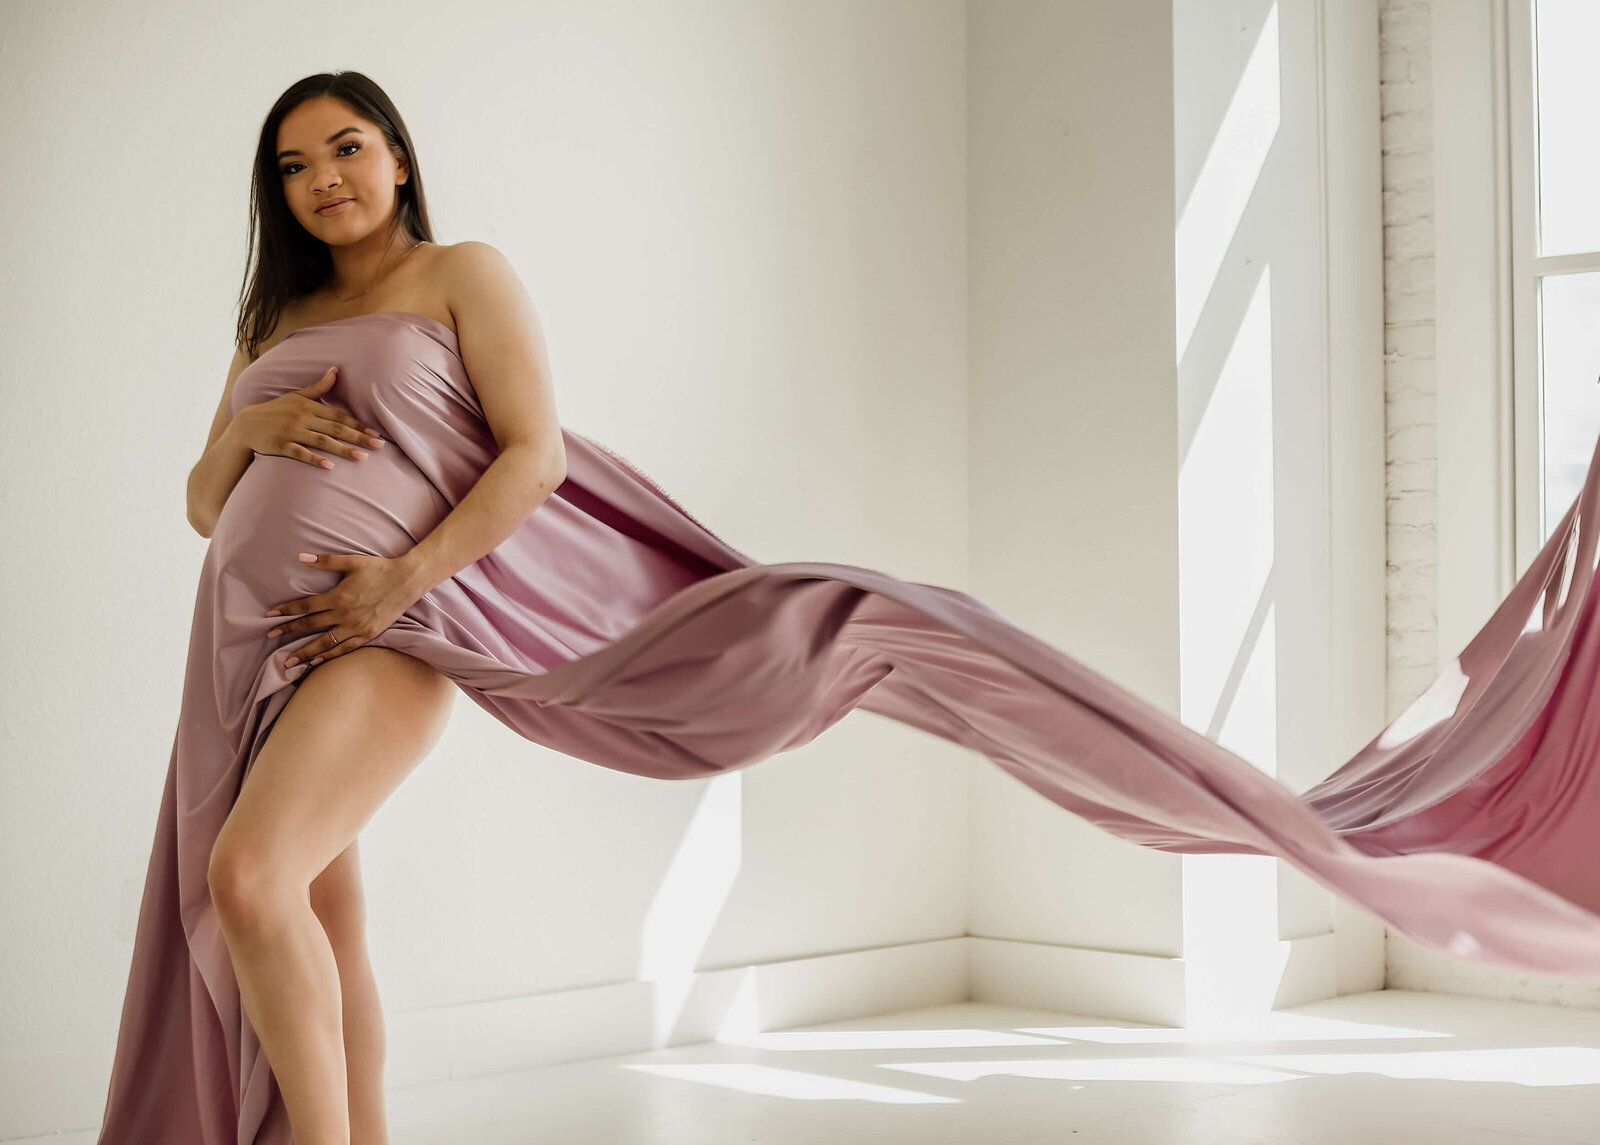 Pregnant woman draped in pink flowing fabric.